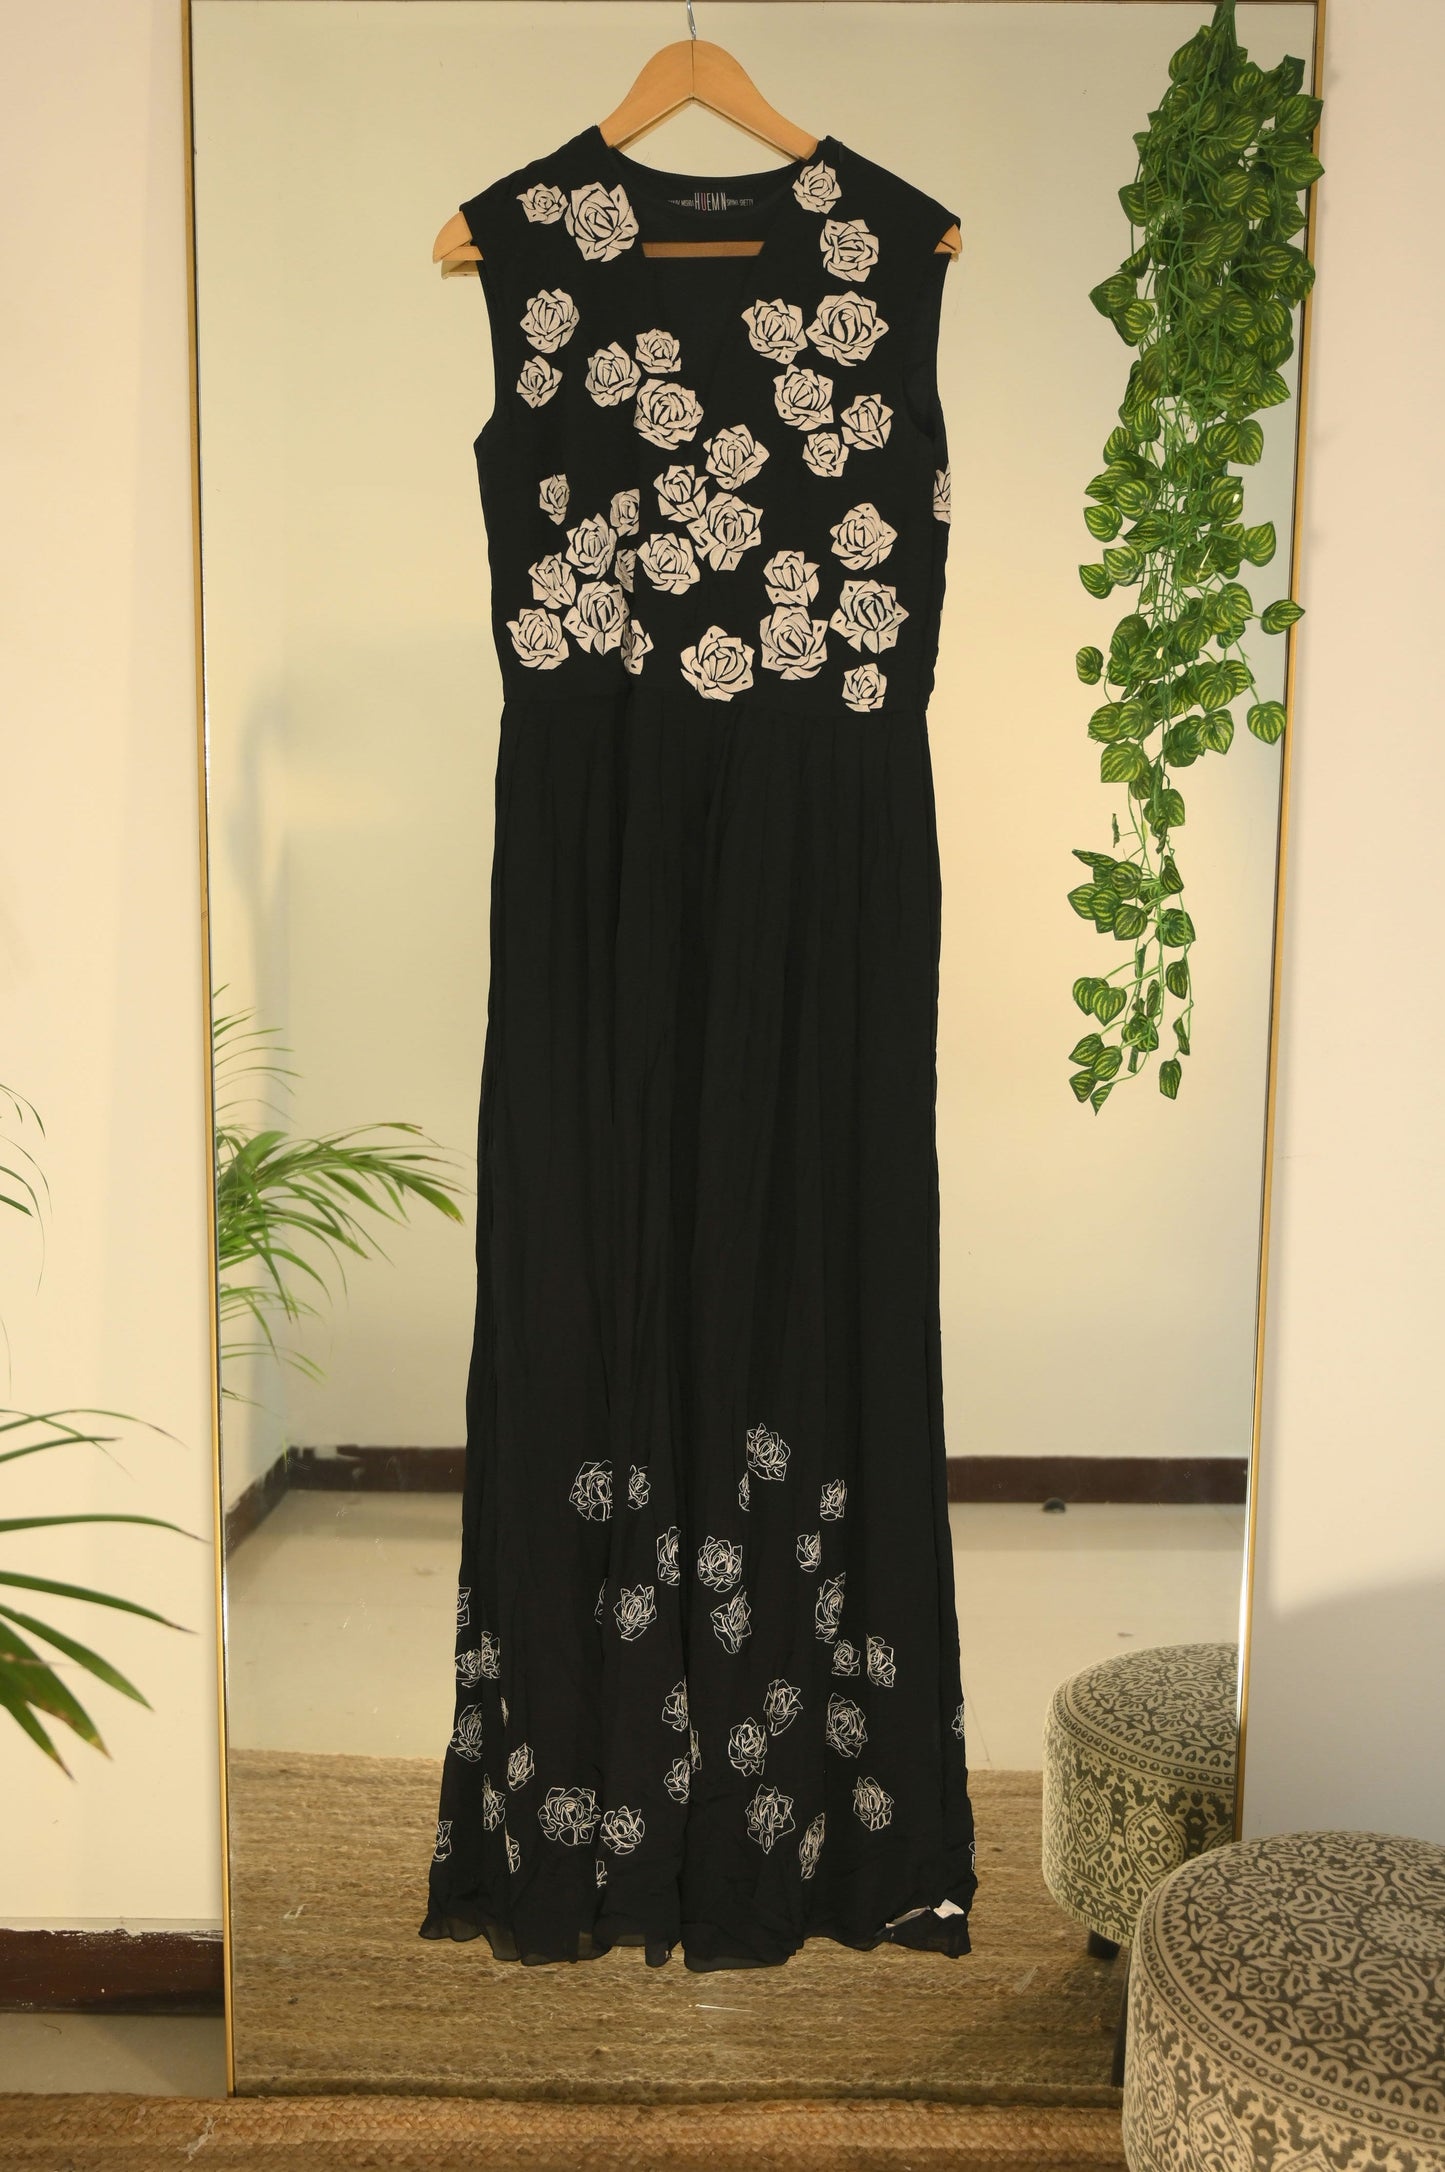 Black Gown with white embroidered roses